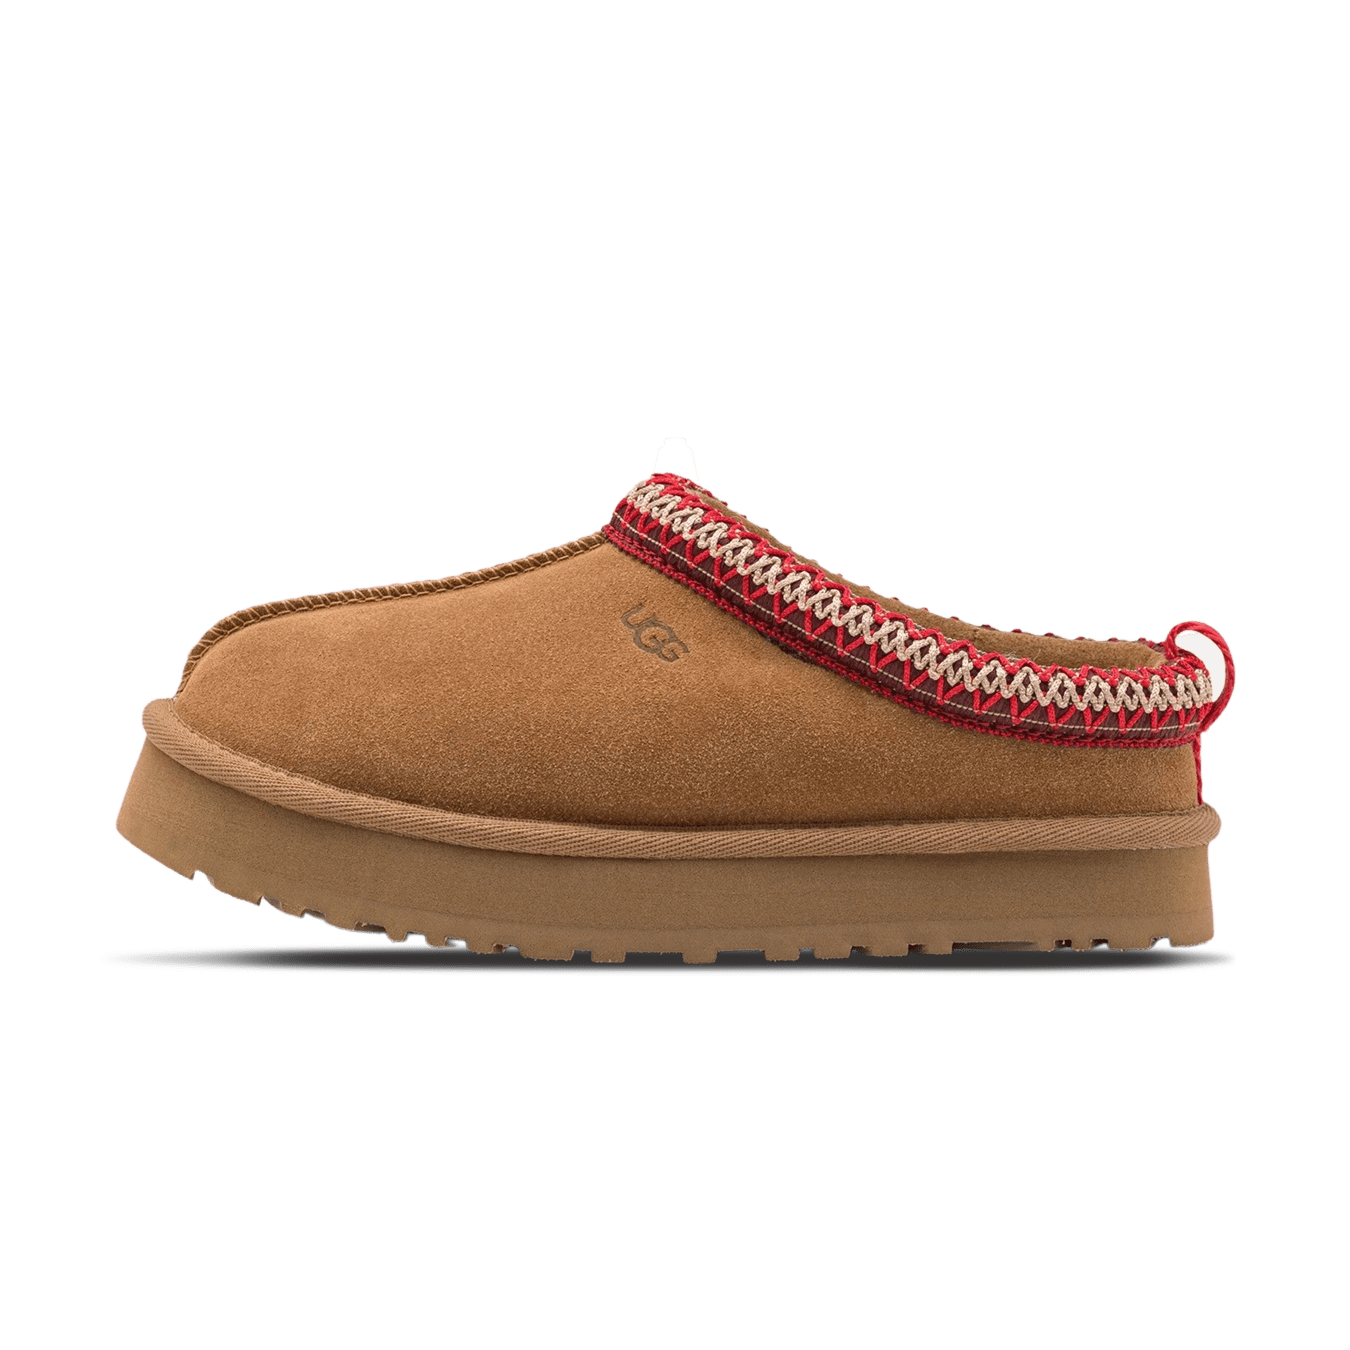 Uggs Louis Vuitton leather - Unofficial: Red or Dead Egypt